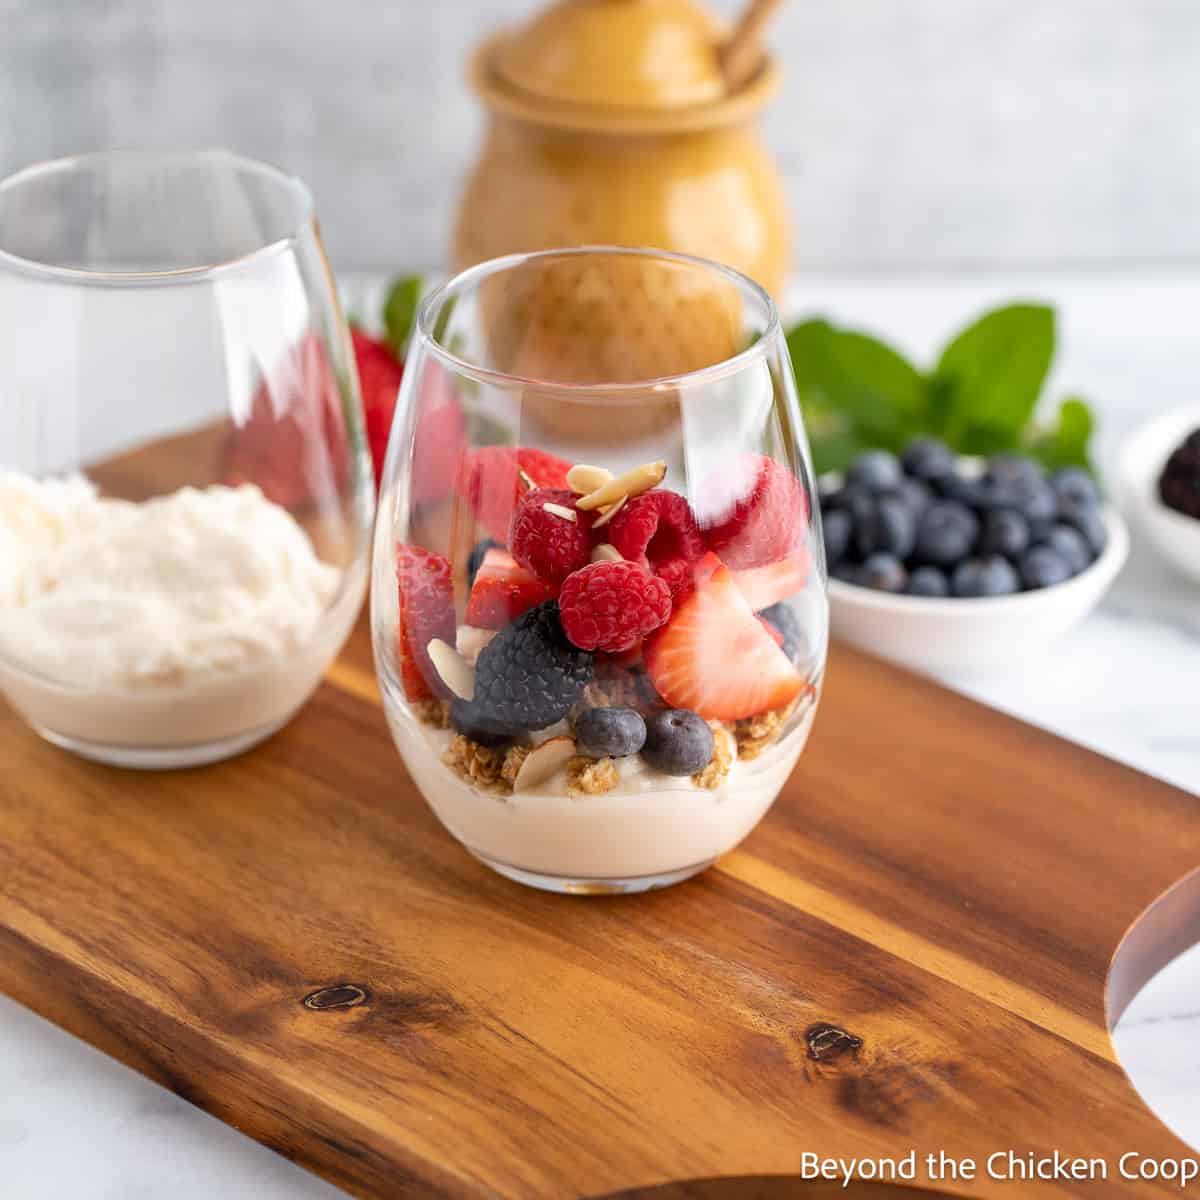 Berries with granola and yogurt in a glass.